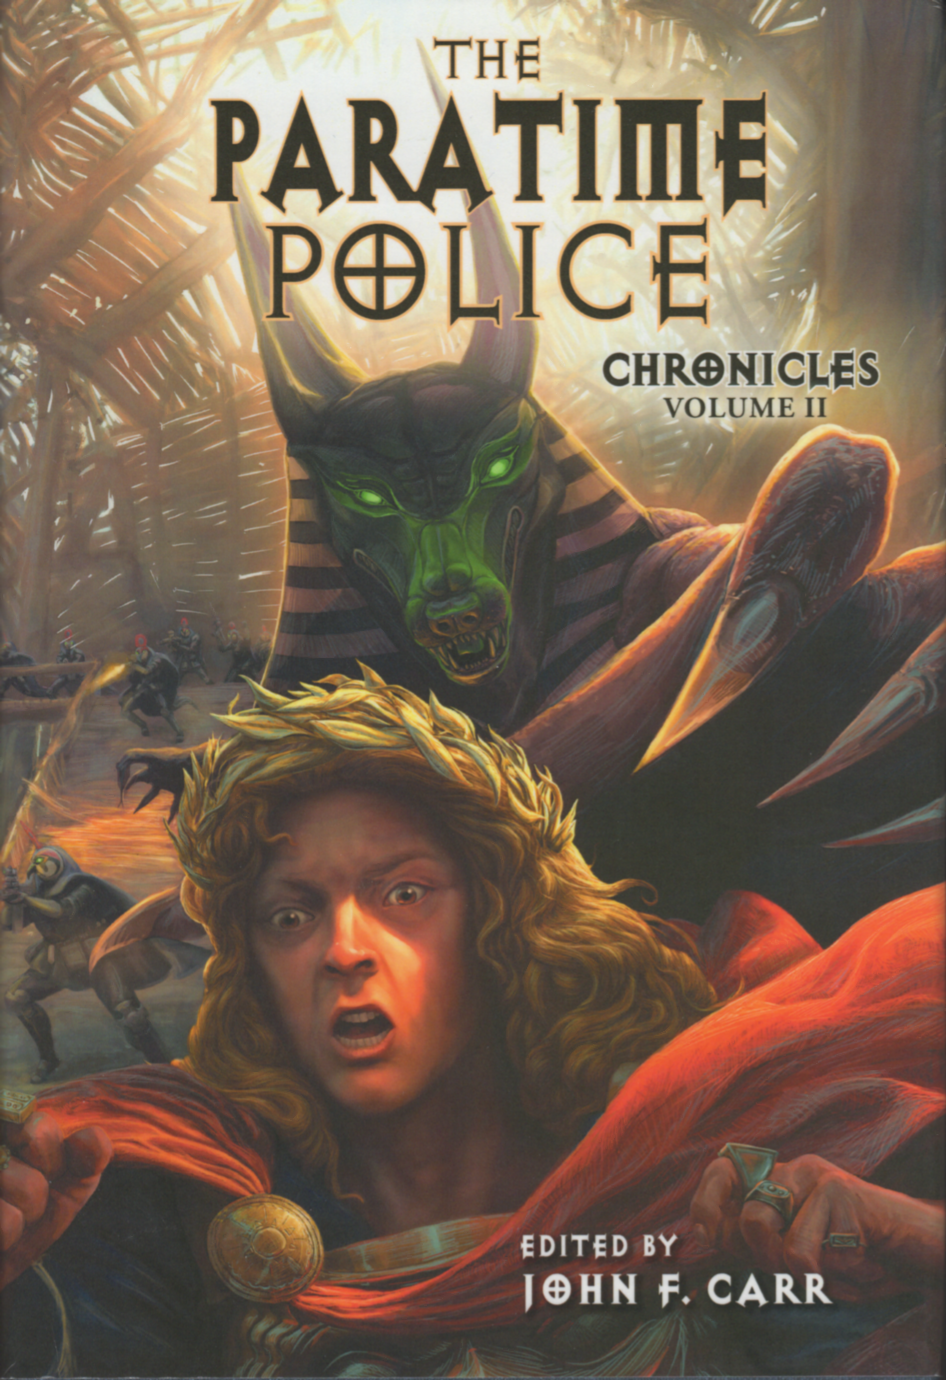 Image - cover of The Paratime Police Chronicles, Volume II